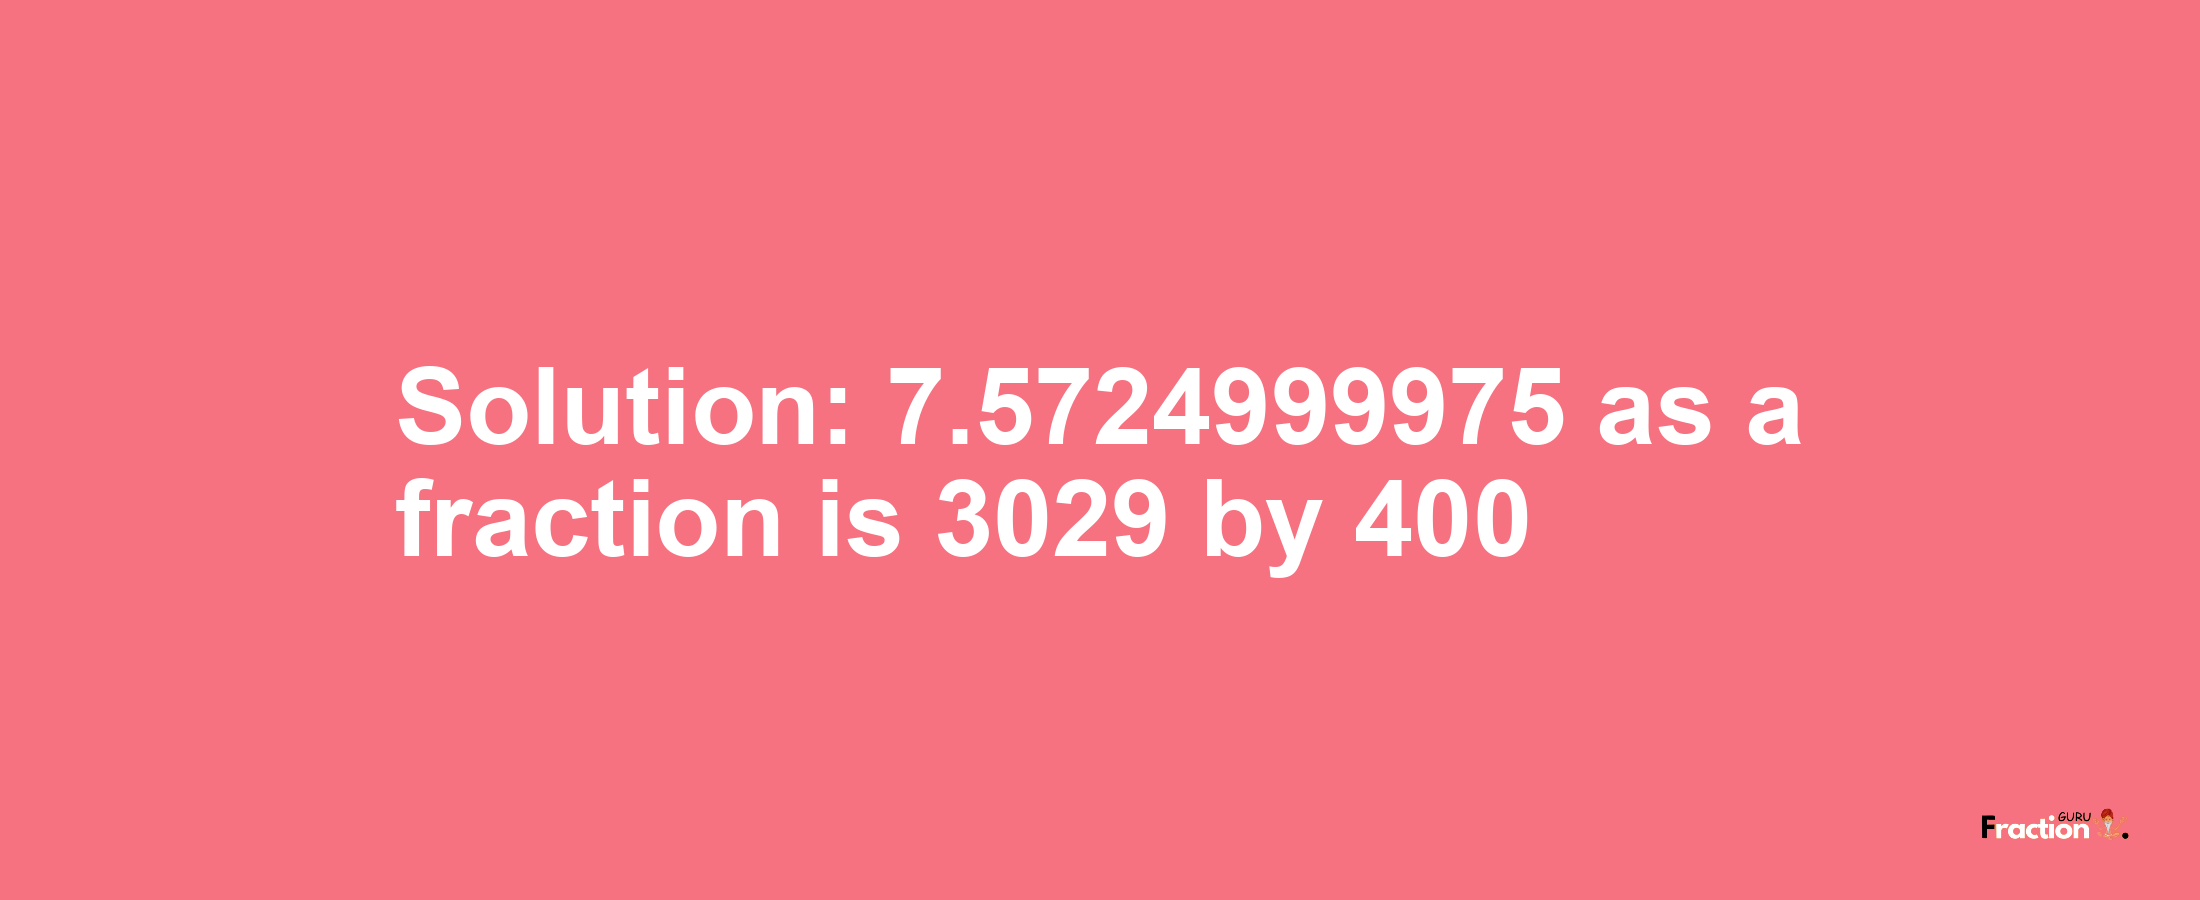 Solution:7.5724999975 as a fraction is 3029/400